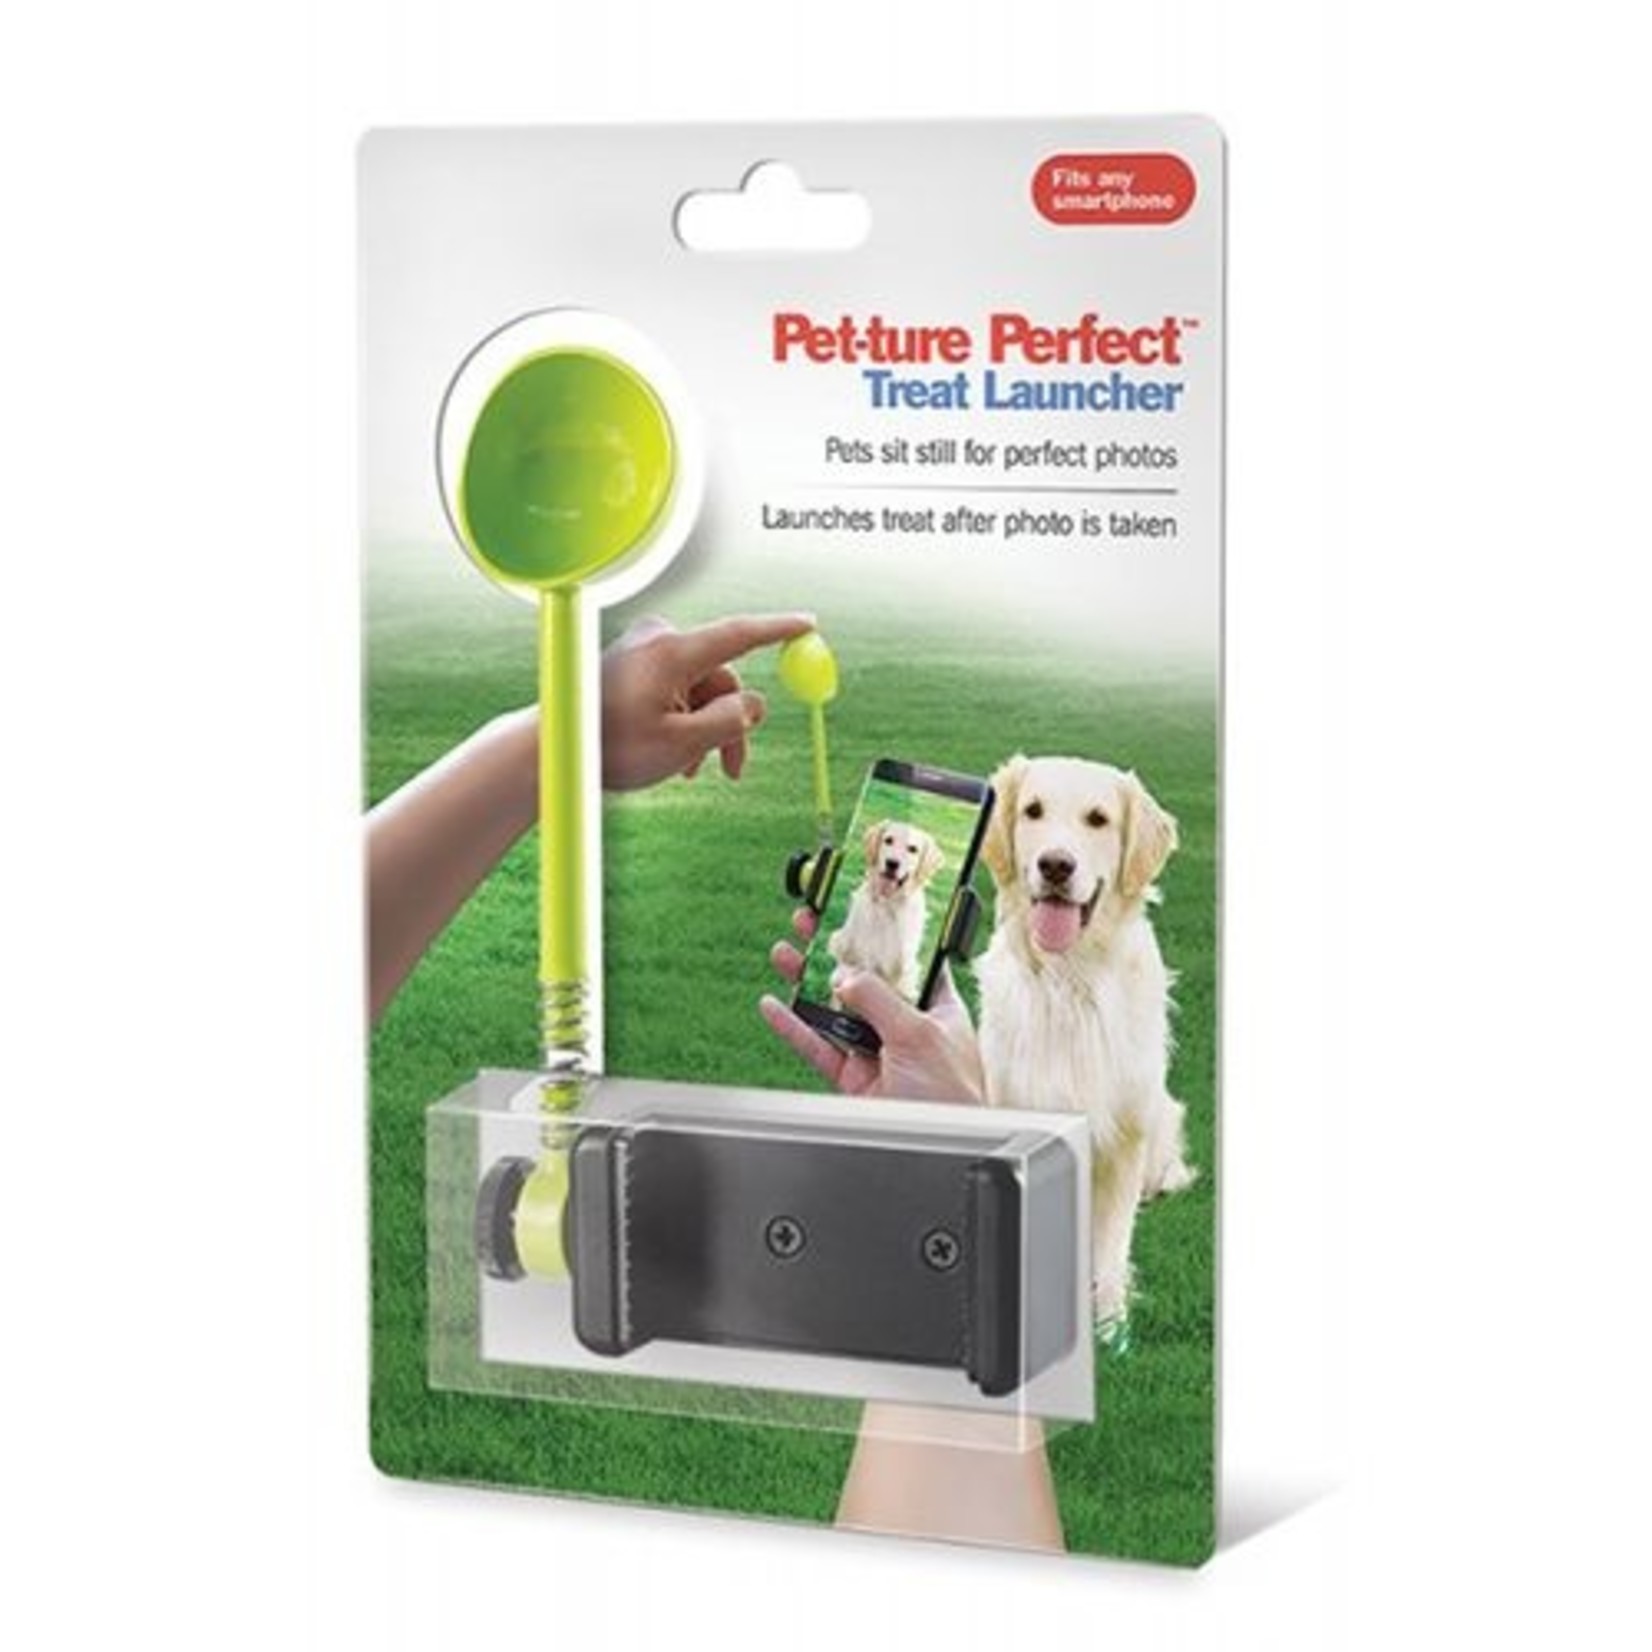 PET-TURE PERFECT TREAT LAUNCH - Lily's TV Items